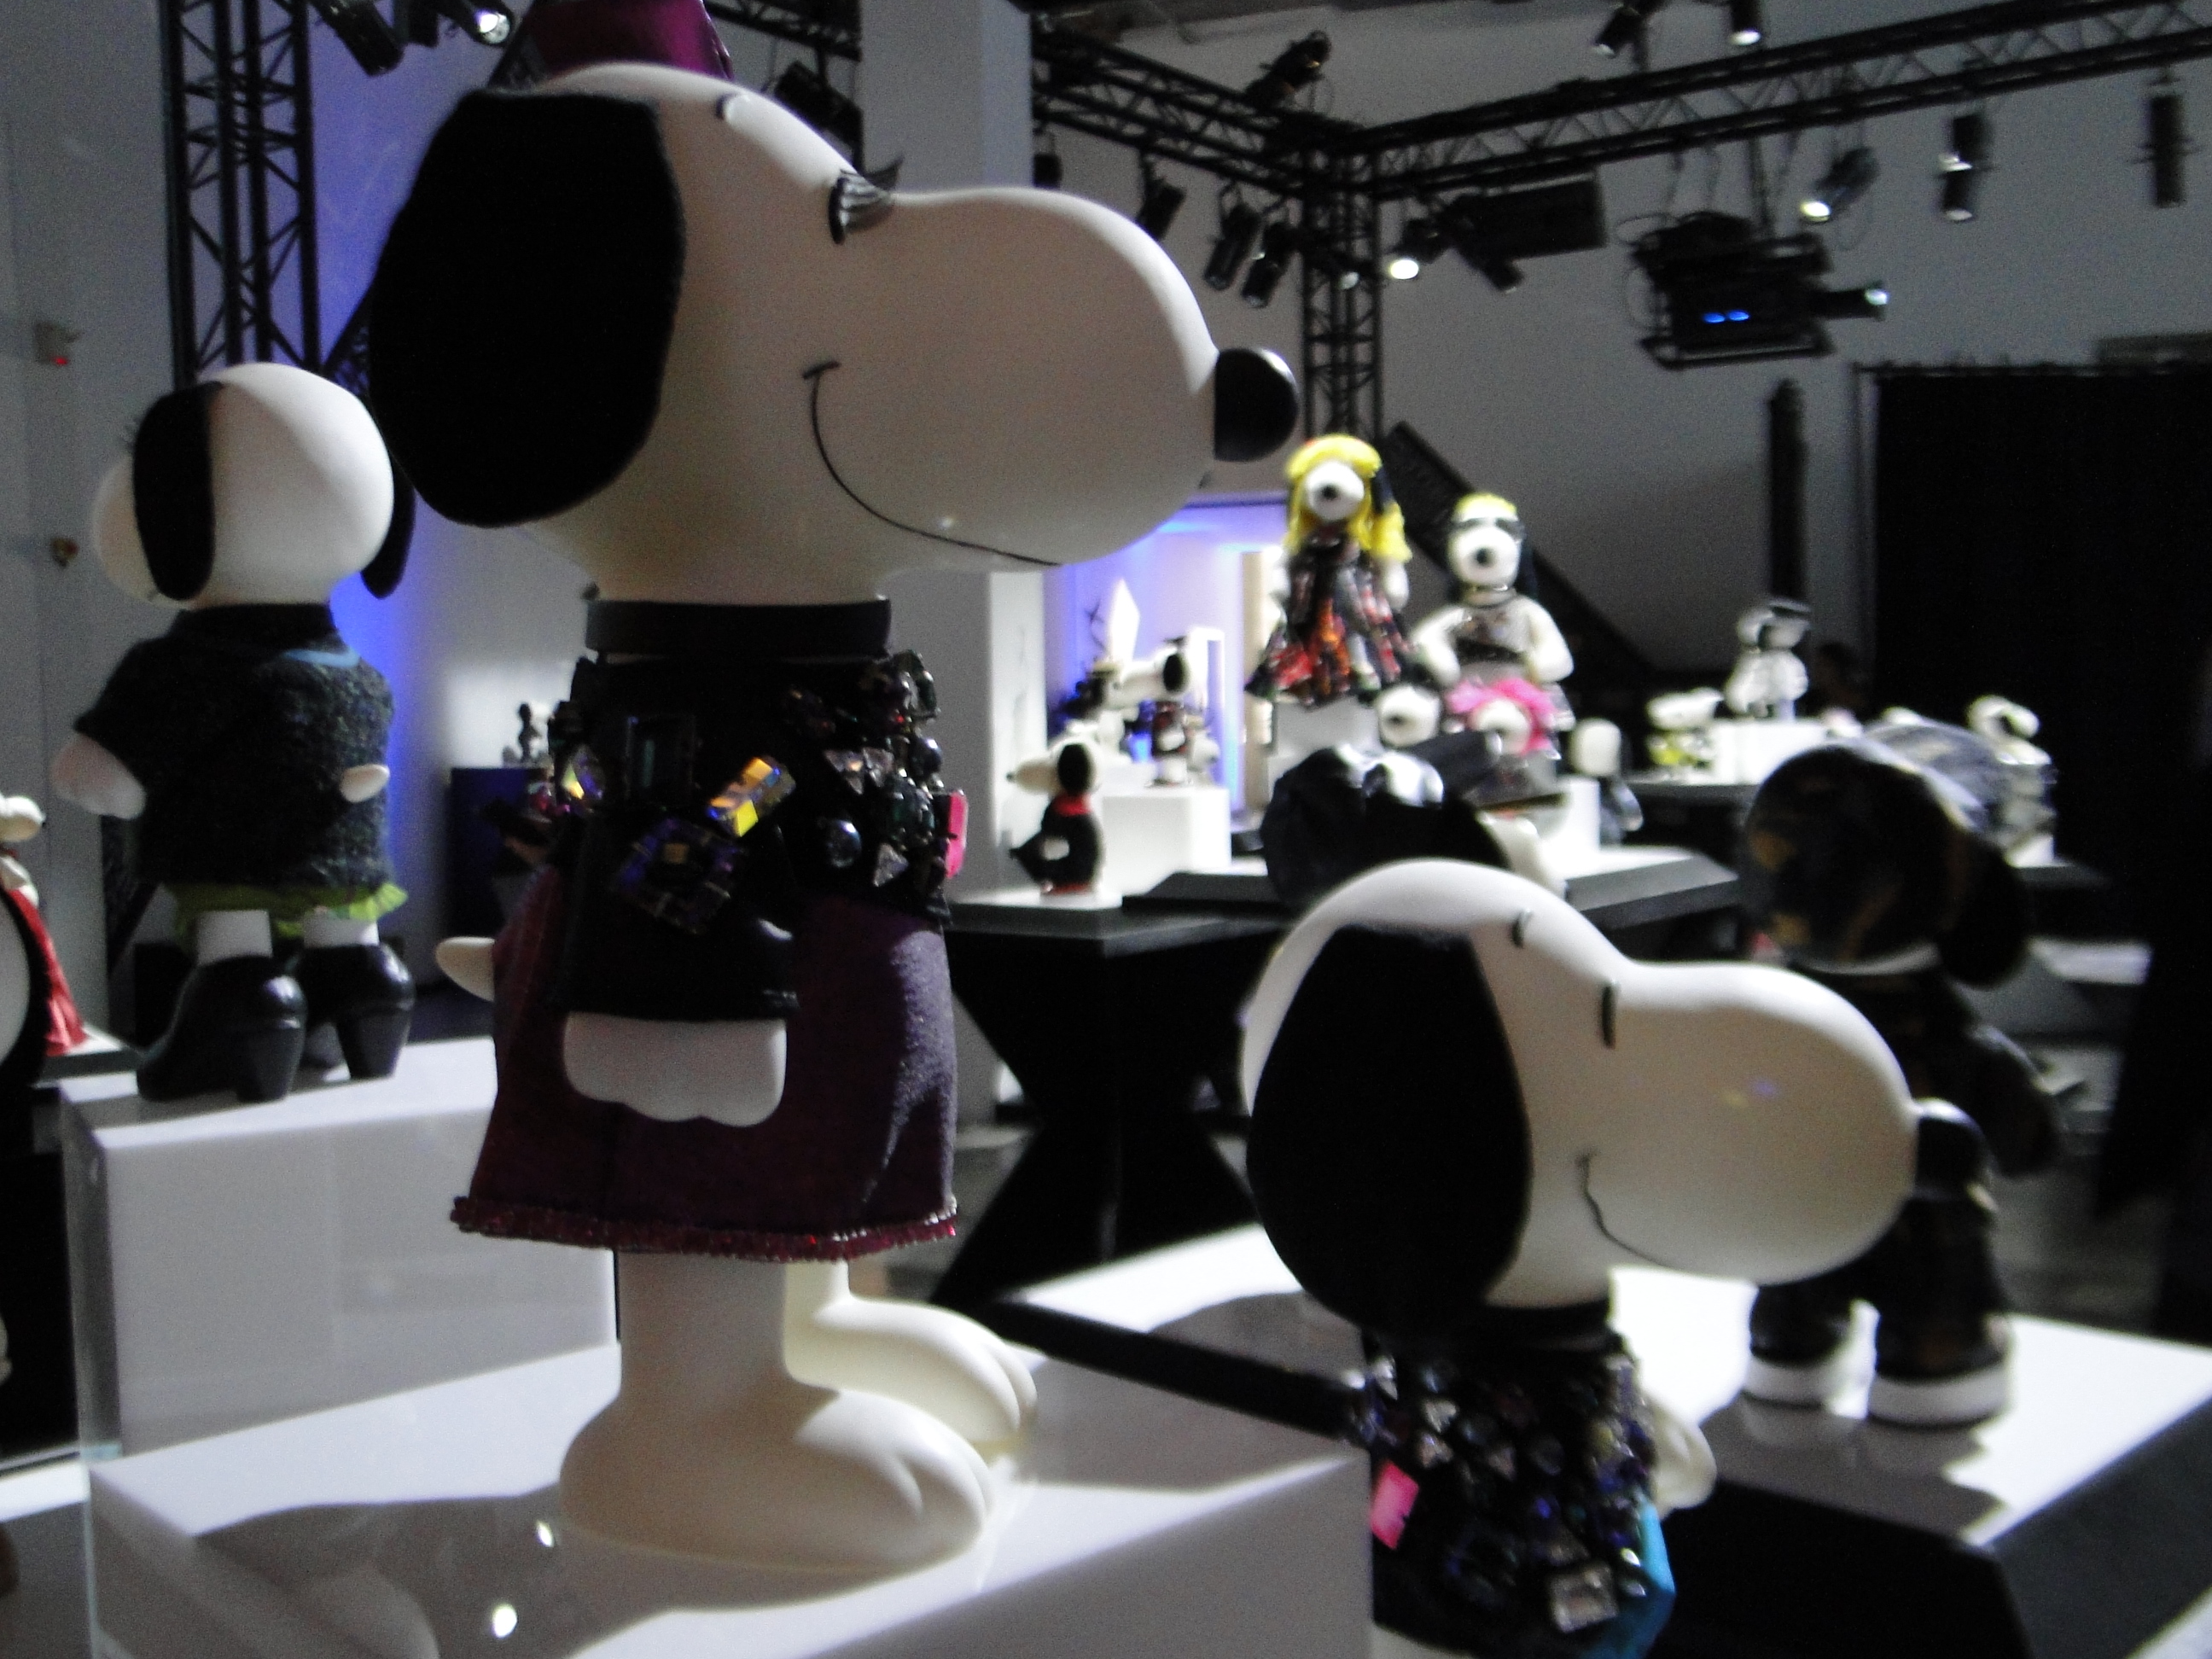 SNOOPY AND BELE IN FASHION Paris France Exhibition Exposition - Palais de Tokyo - copyright Go with the Blog DSC06427